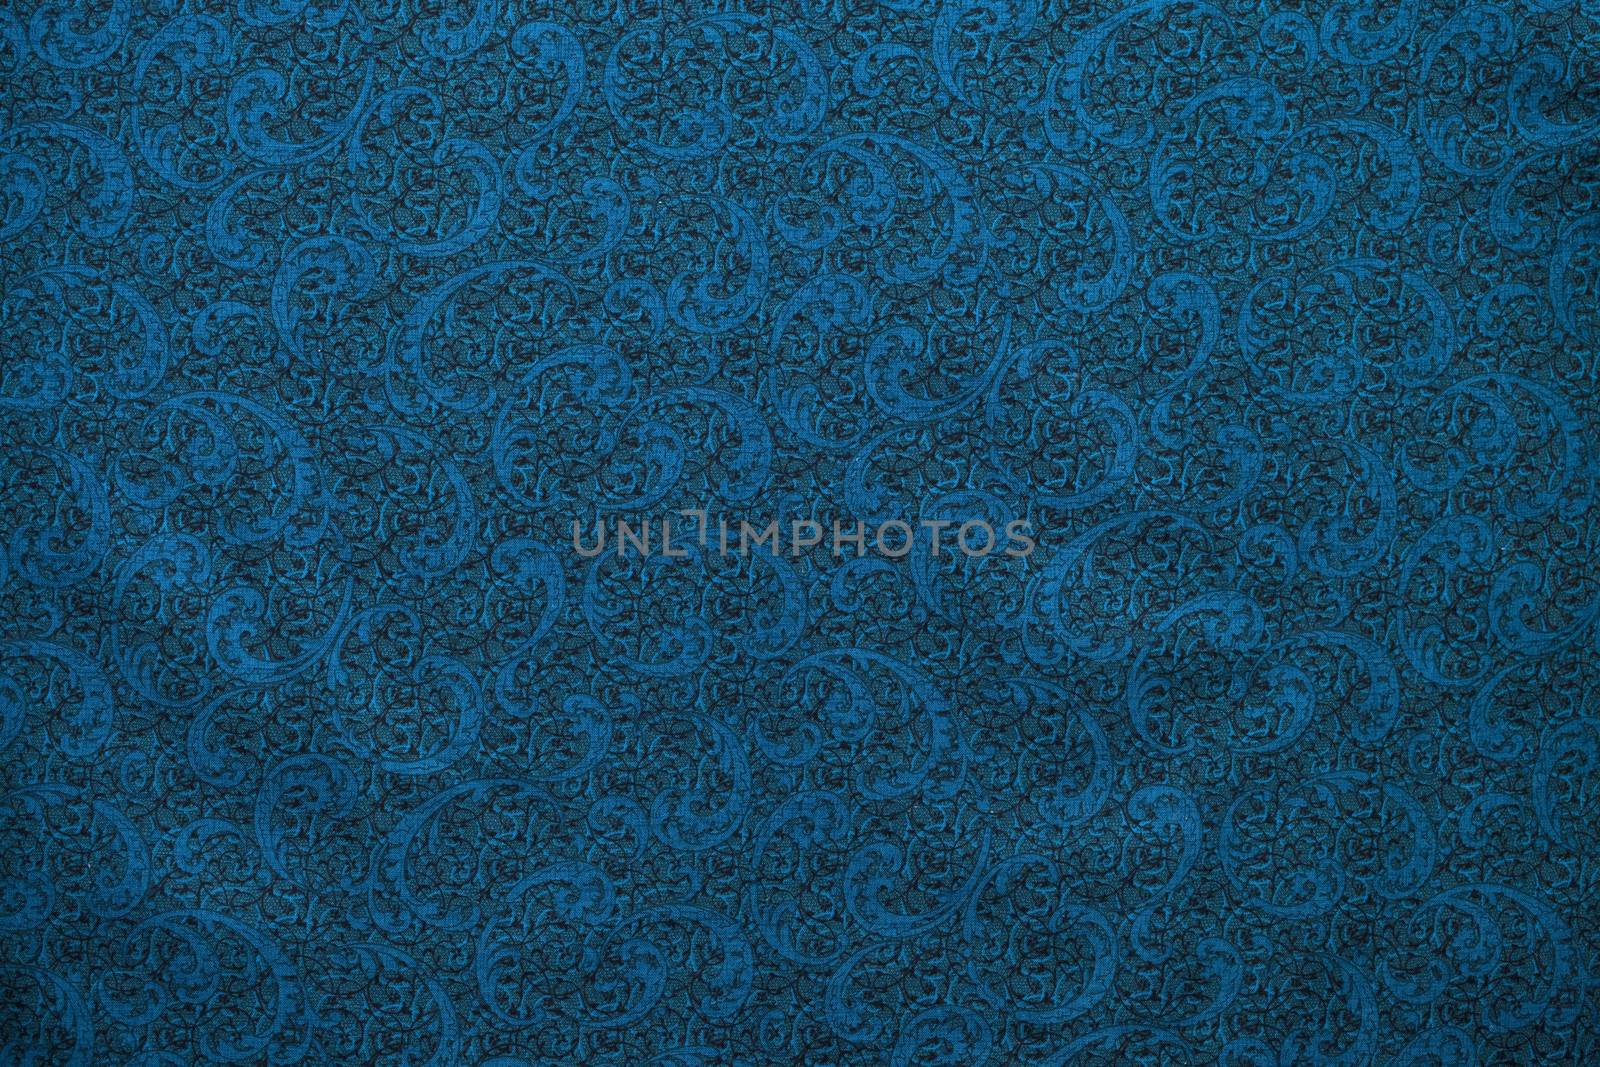 Fabric texture with pattern by andersonrise